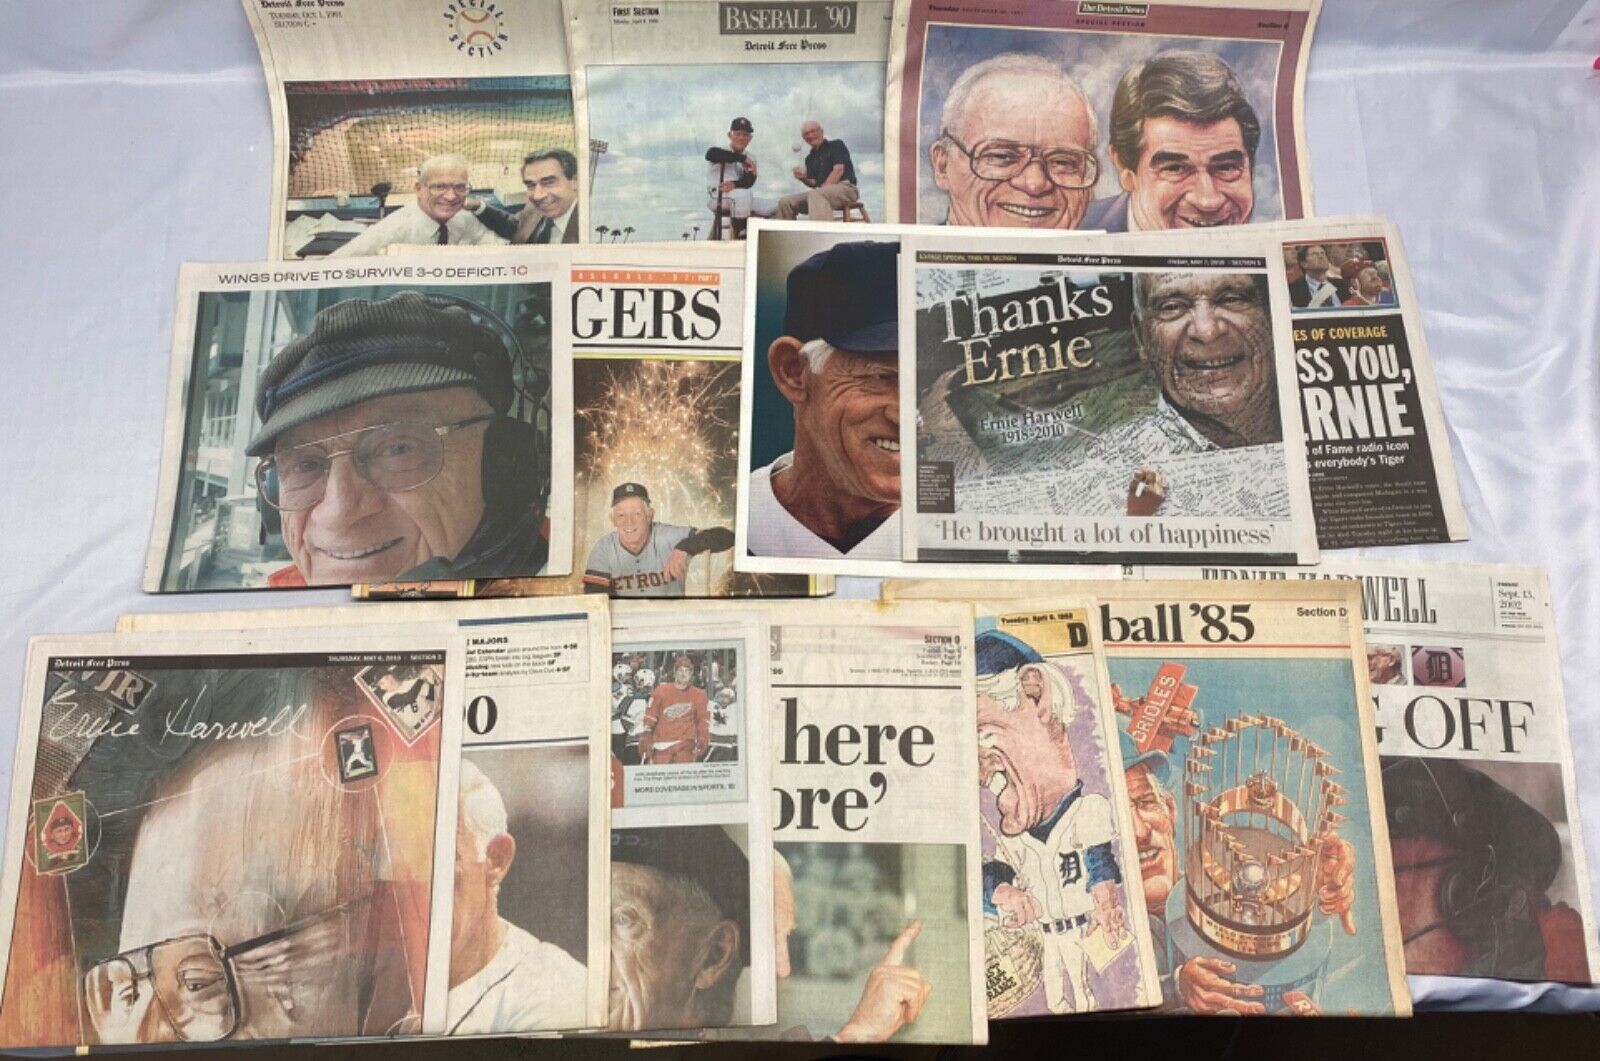 Ernie Harwell & Sparky Anderson Detroit News & Free Press Newspapers—-Lot of 15